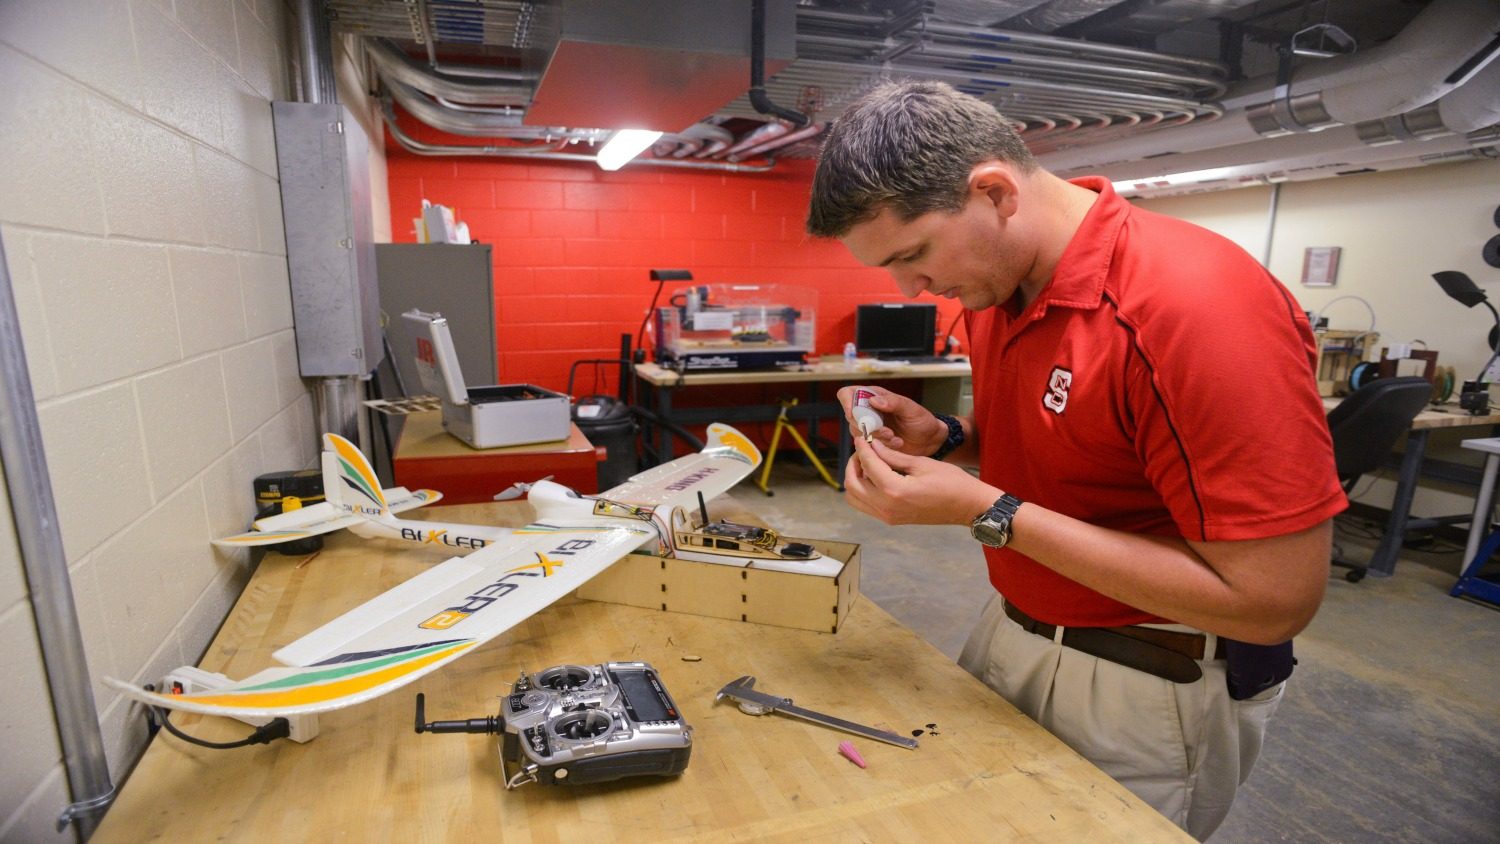 Graduate student Brett Pearce works in the innovation hall garage. He works in RC planes and aeronautics. Photo by Marc Hall